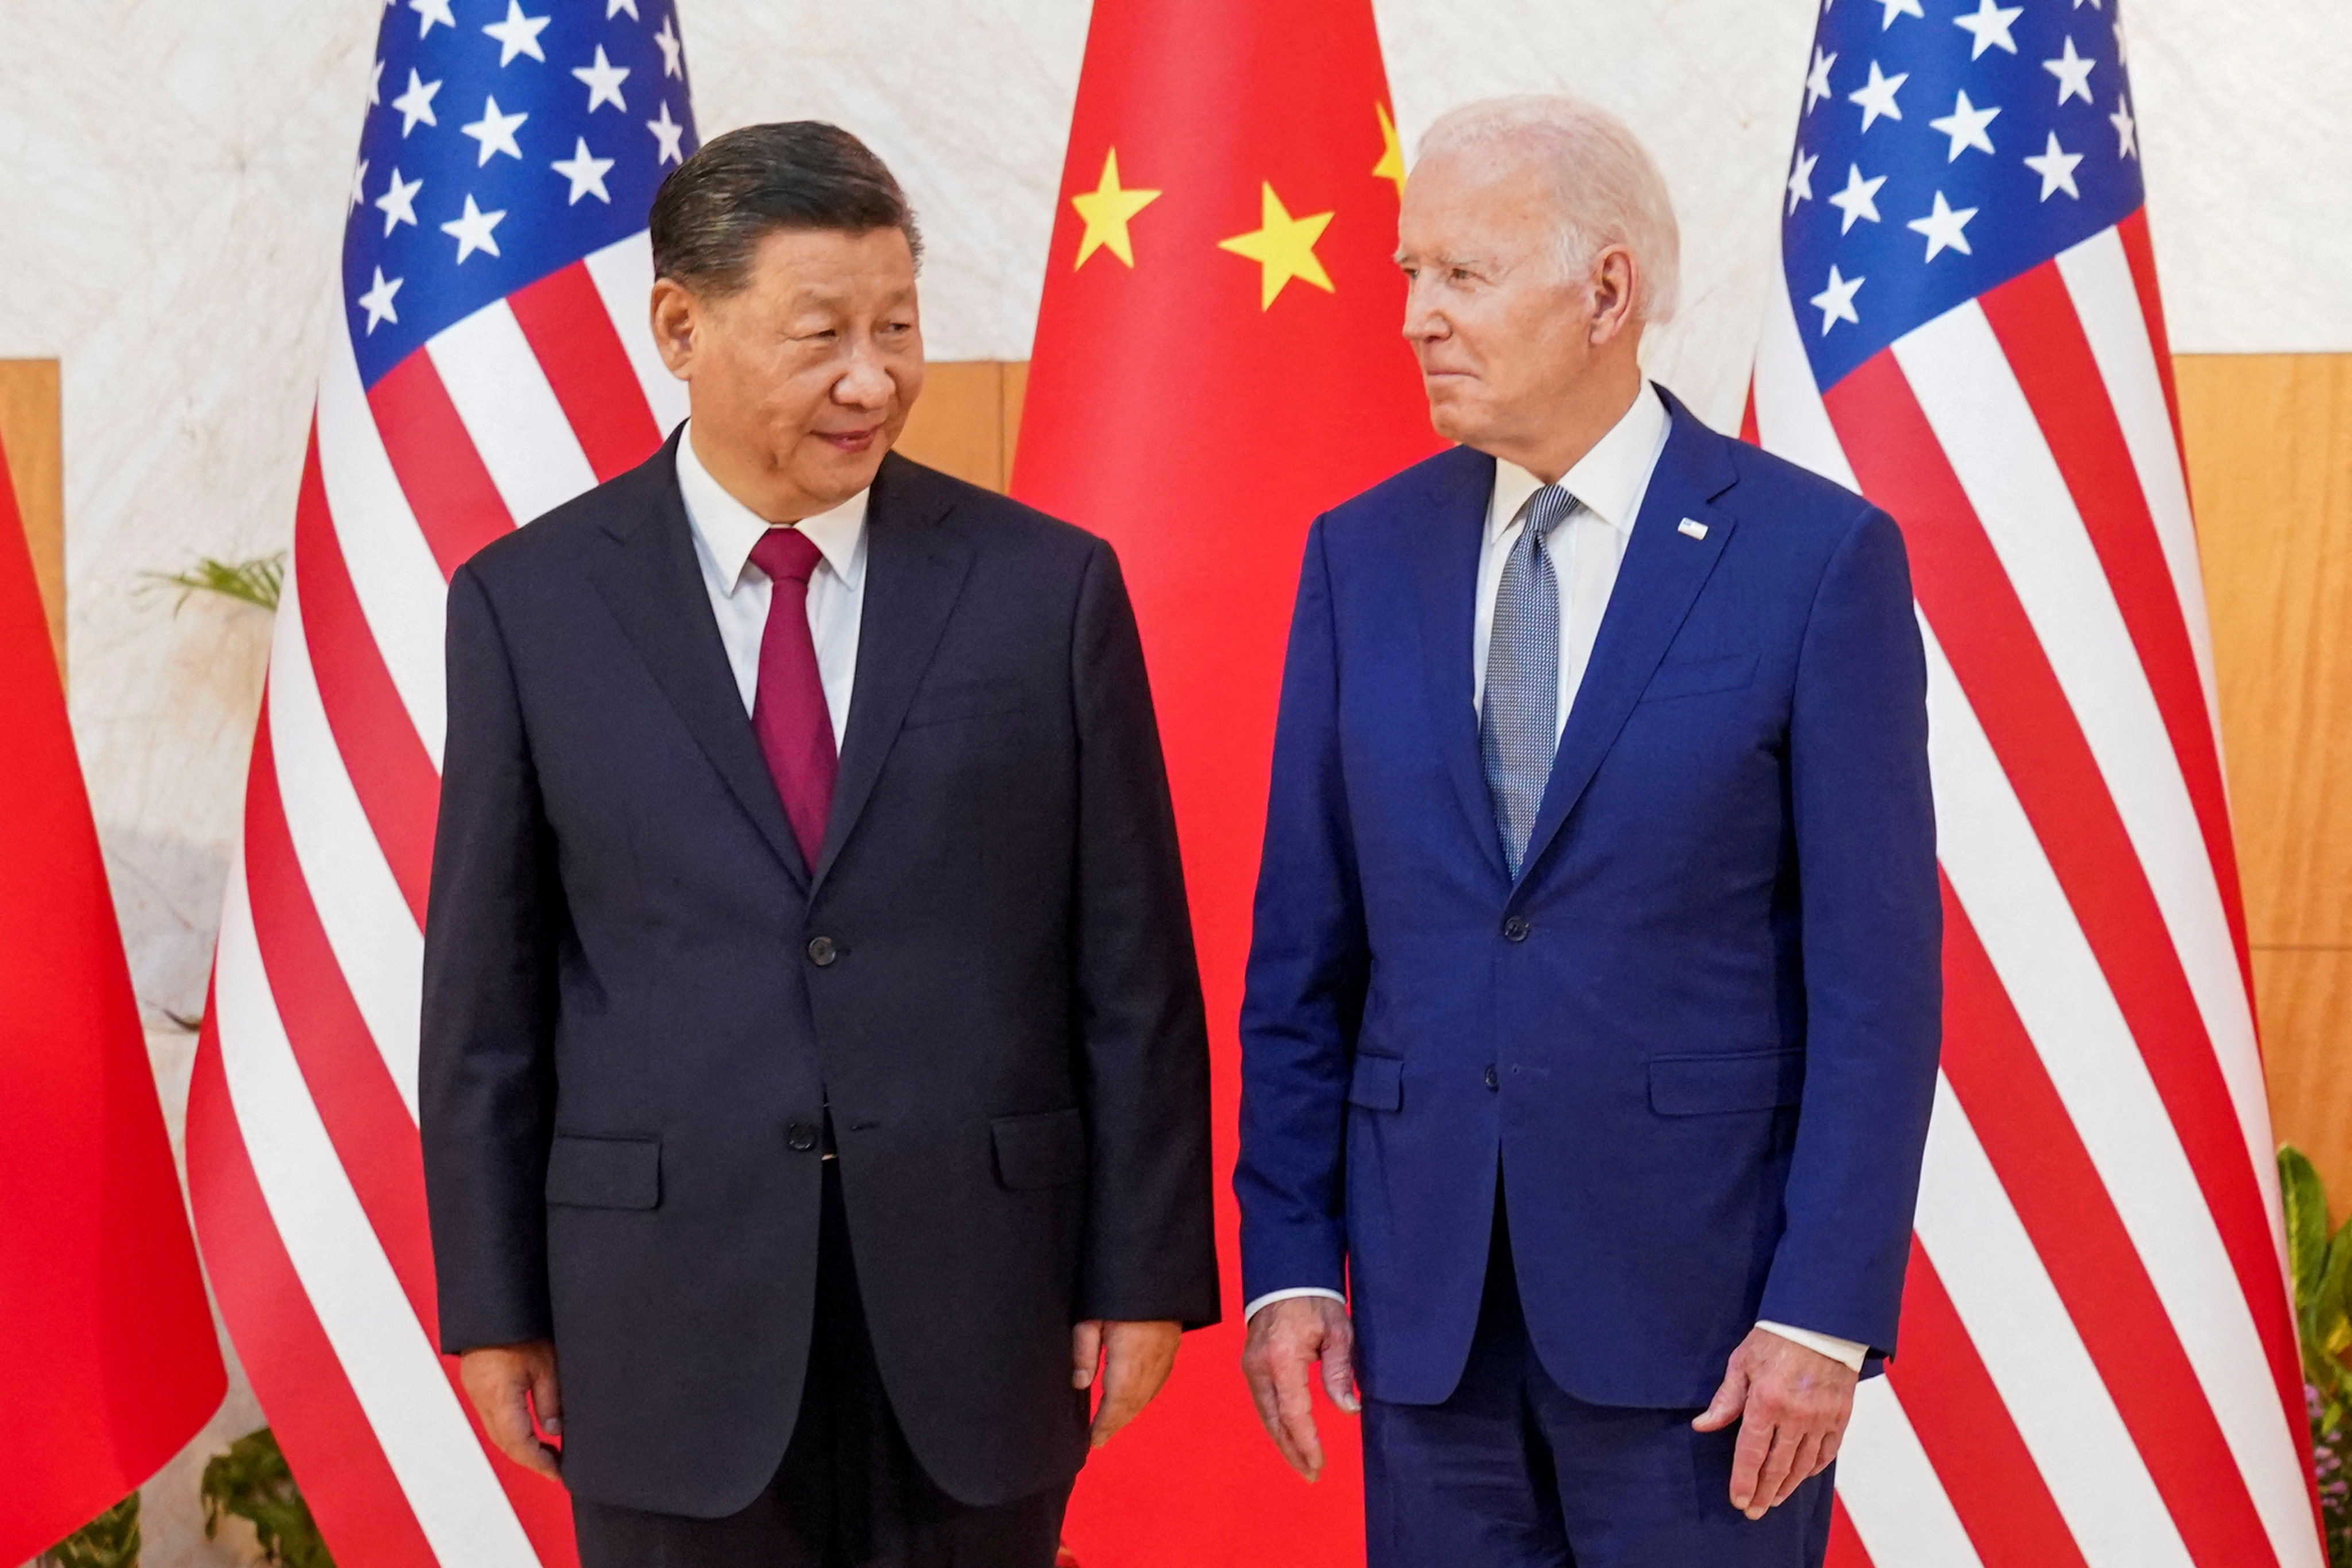 US President Joe Biden with Chinese leader Xi Jinping at the 2022 G20 summit in Bali. Photo: Reuters